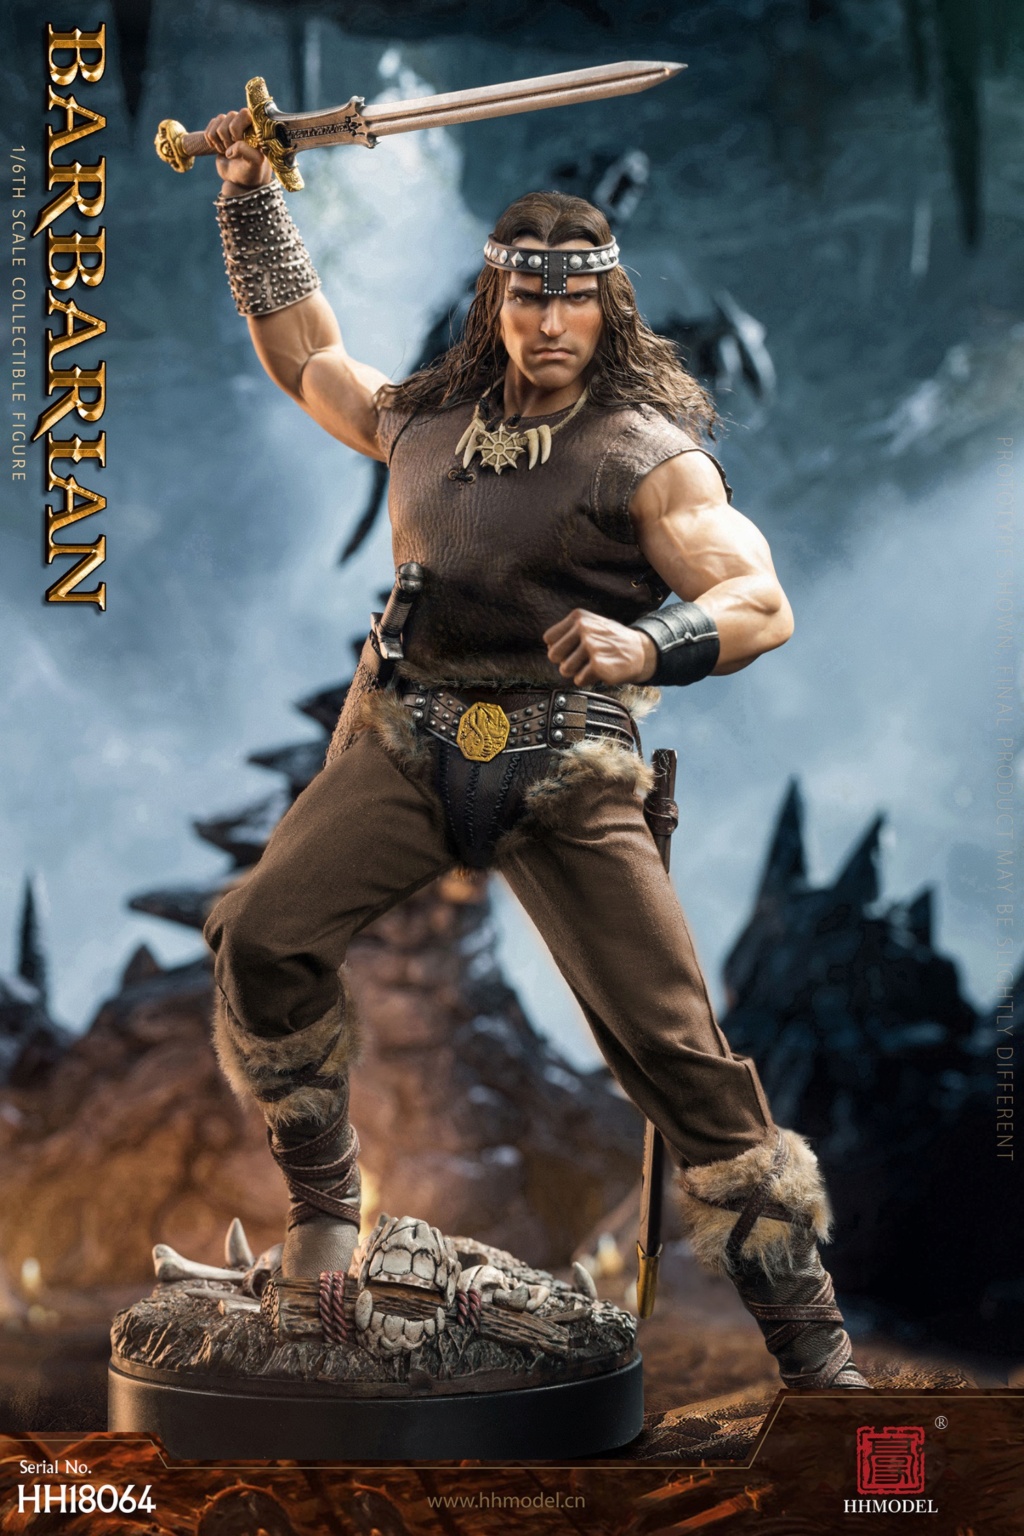 NEW PRODUCT: Haoyutoys: HH18064 1/6 Scale The Barbarian 18002110